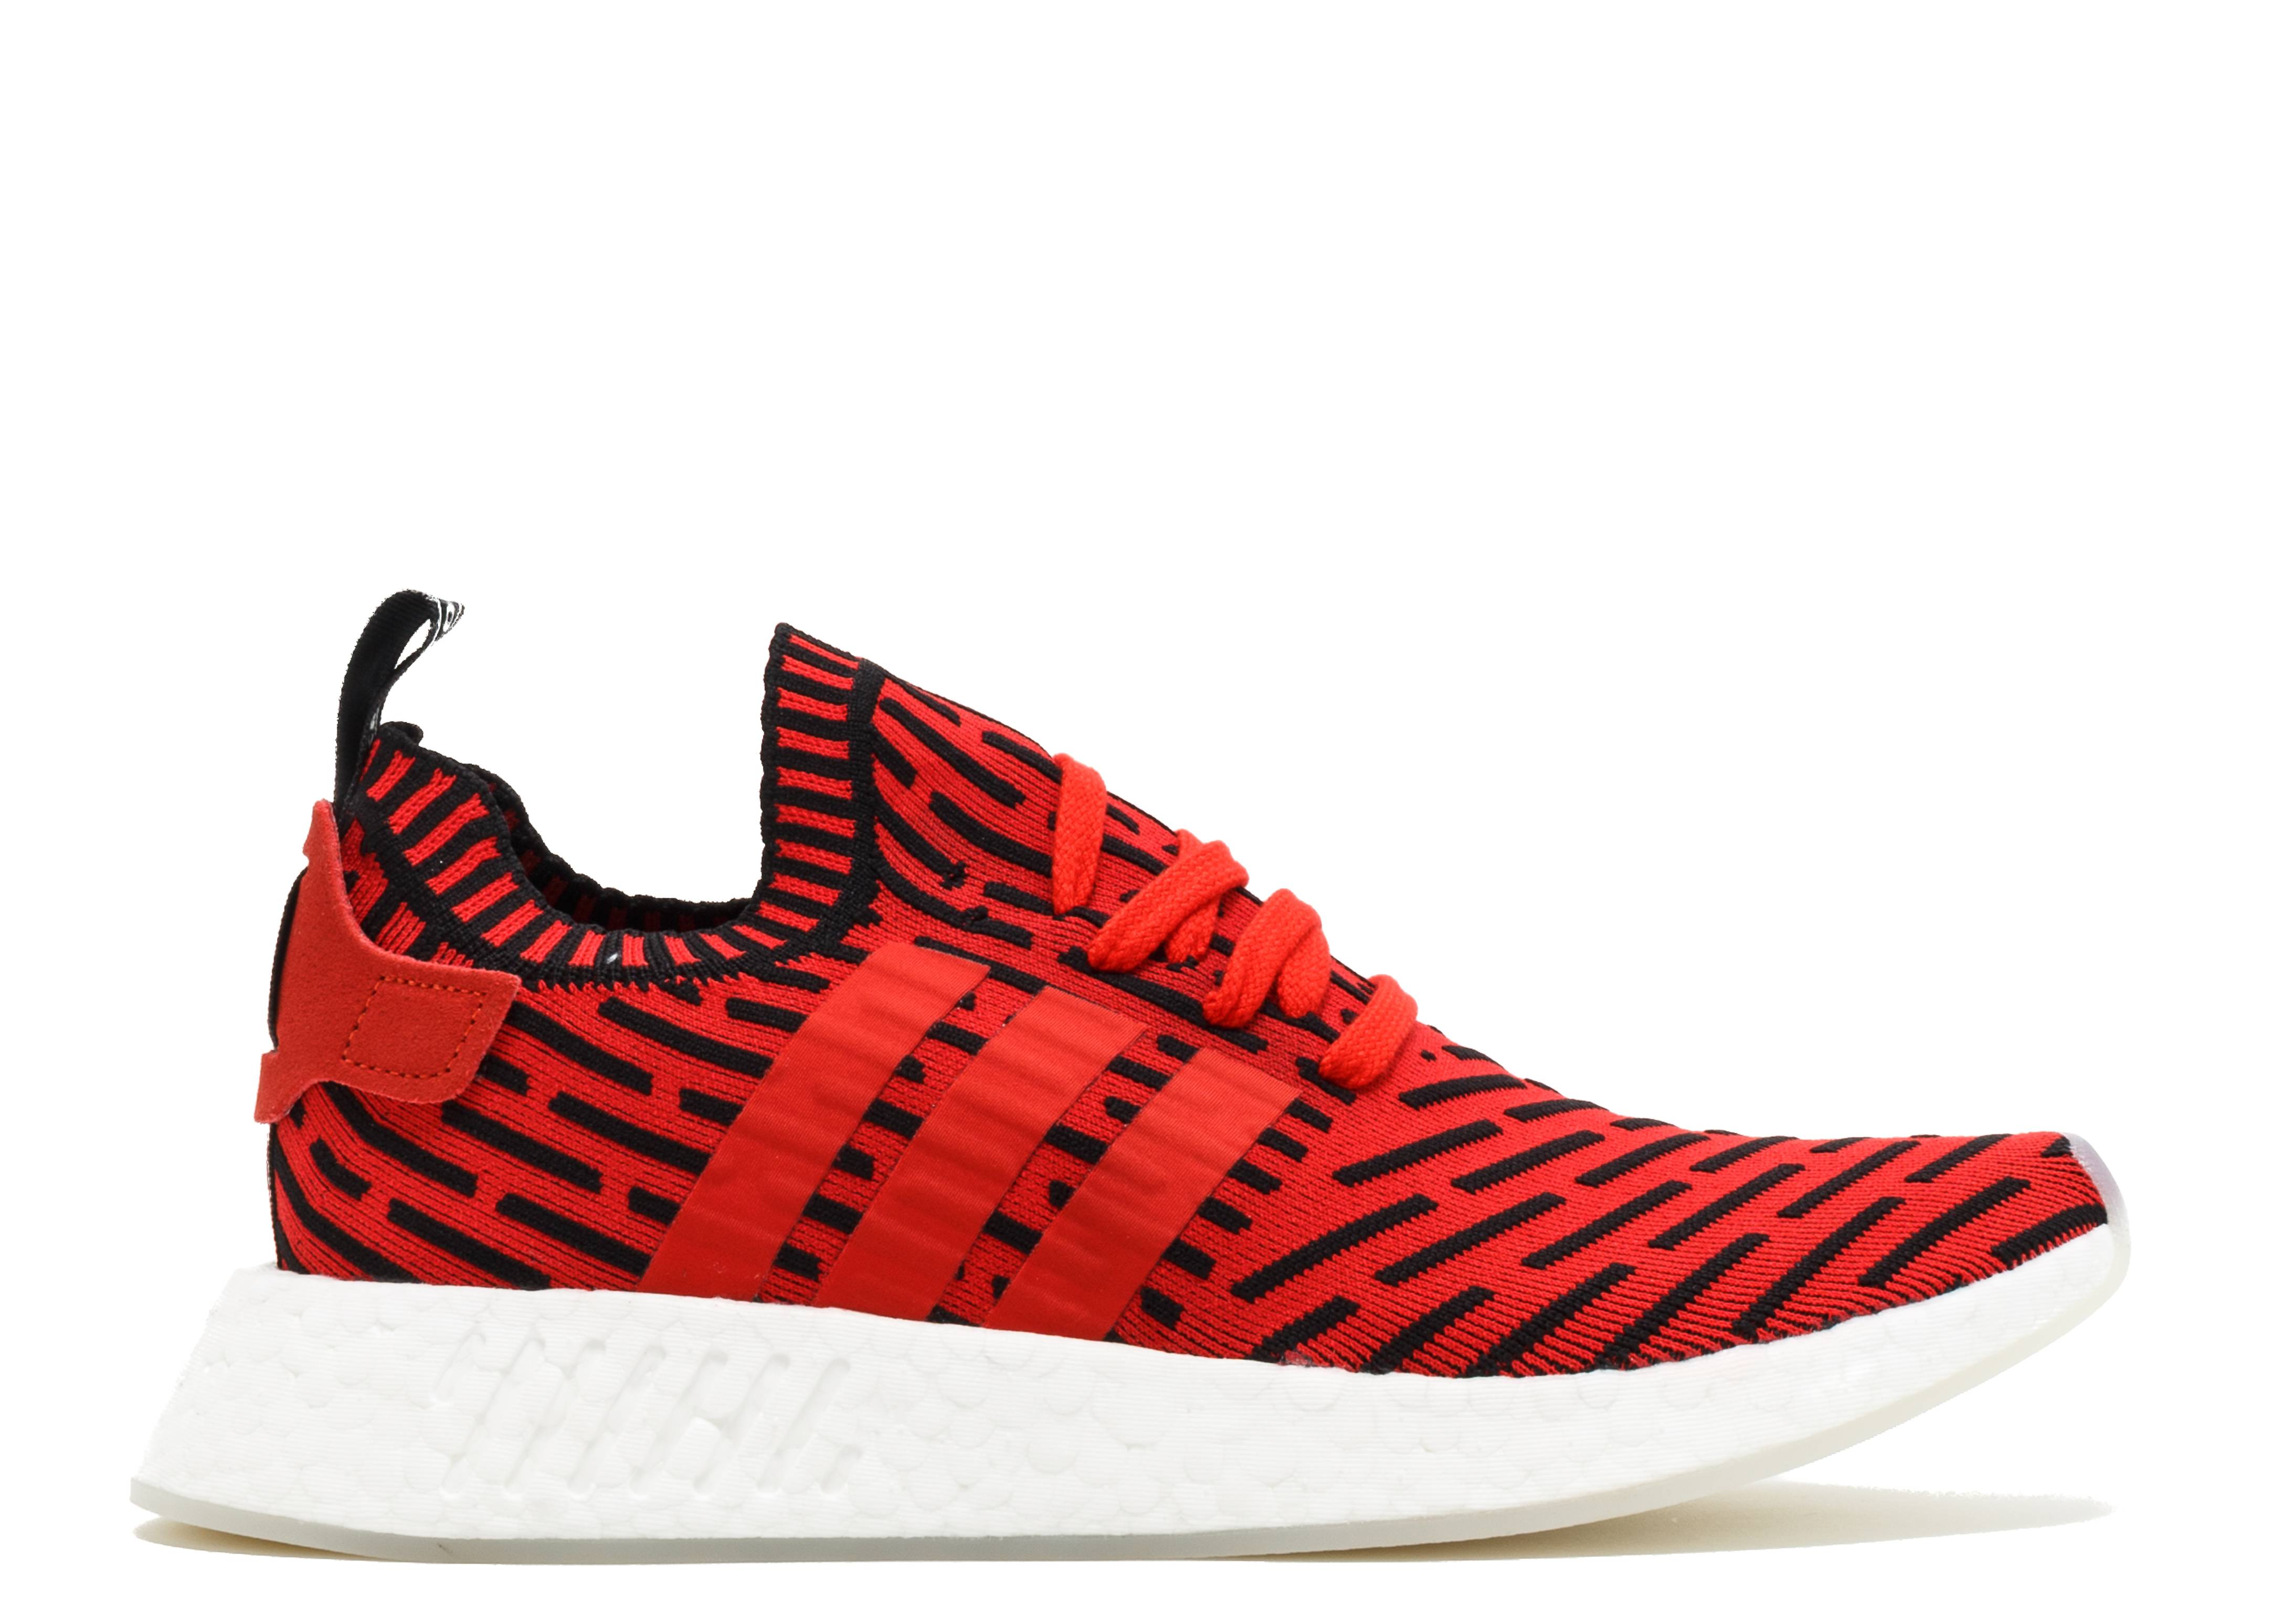 NMD_R2 PK 'Core Red'